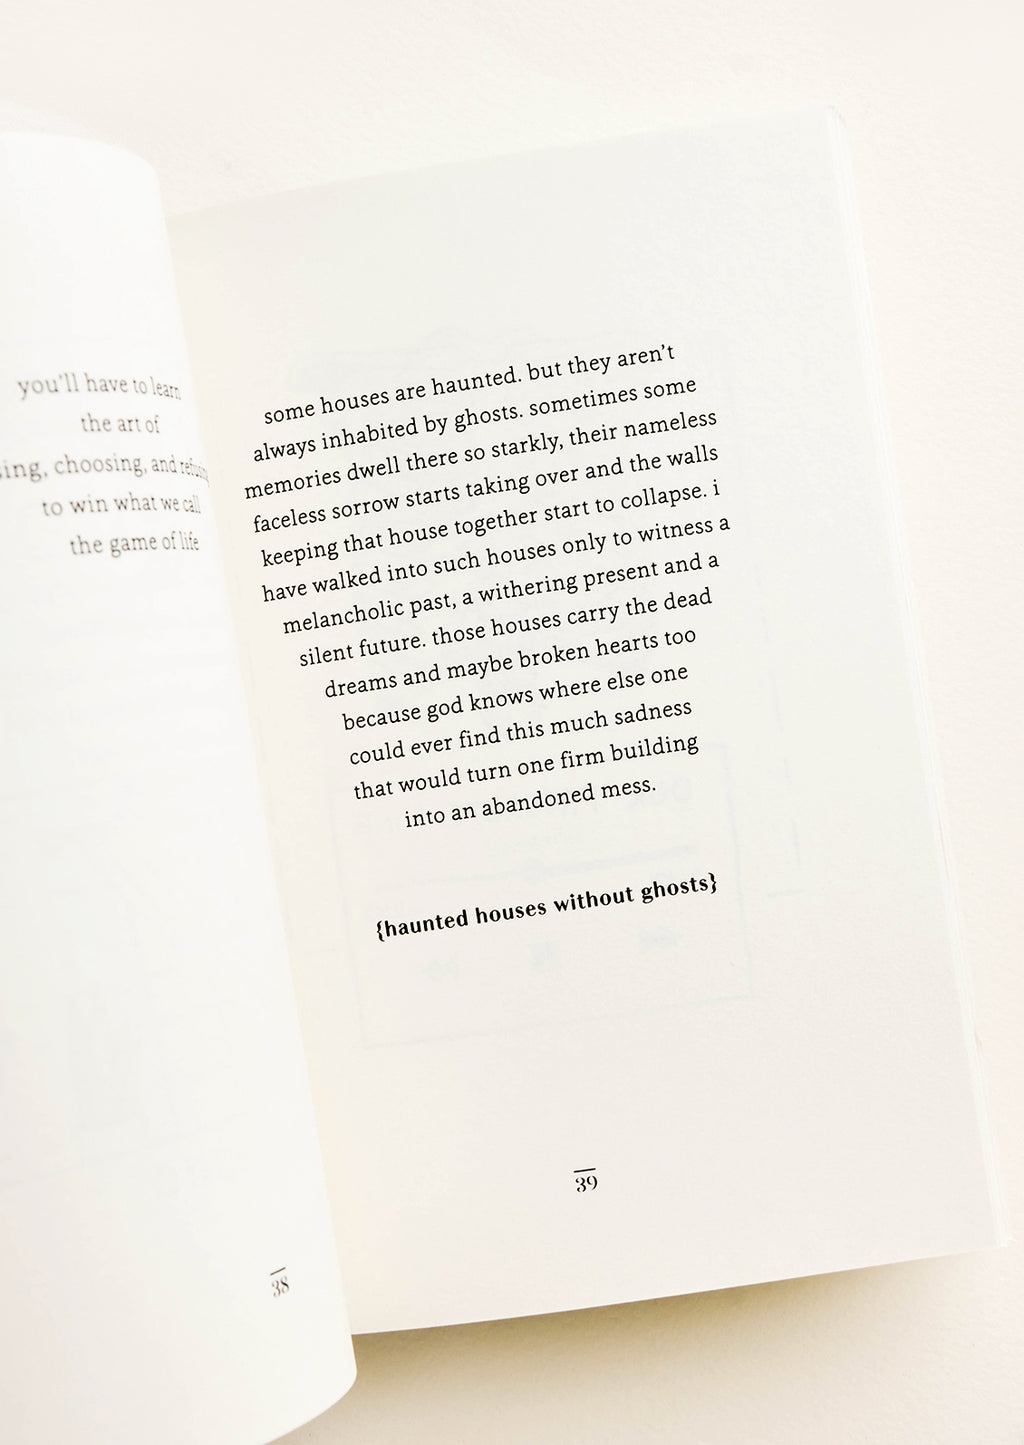 4: Inside pages of a softcover poetry book featuring a poem titled "Haunted Houses Without Ghosts"